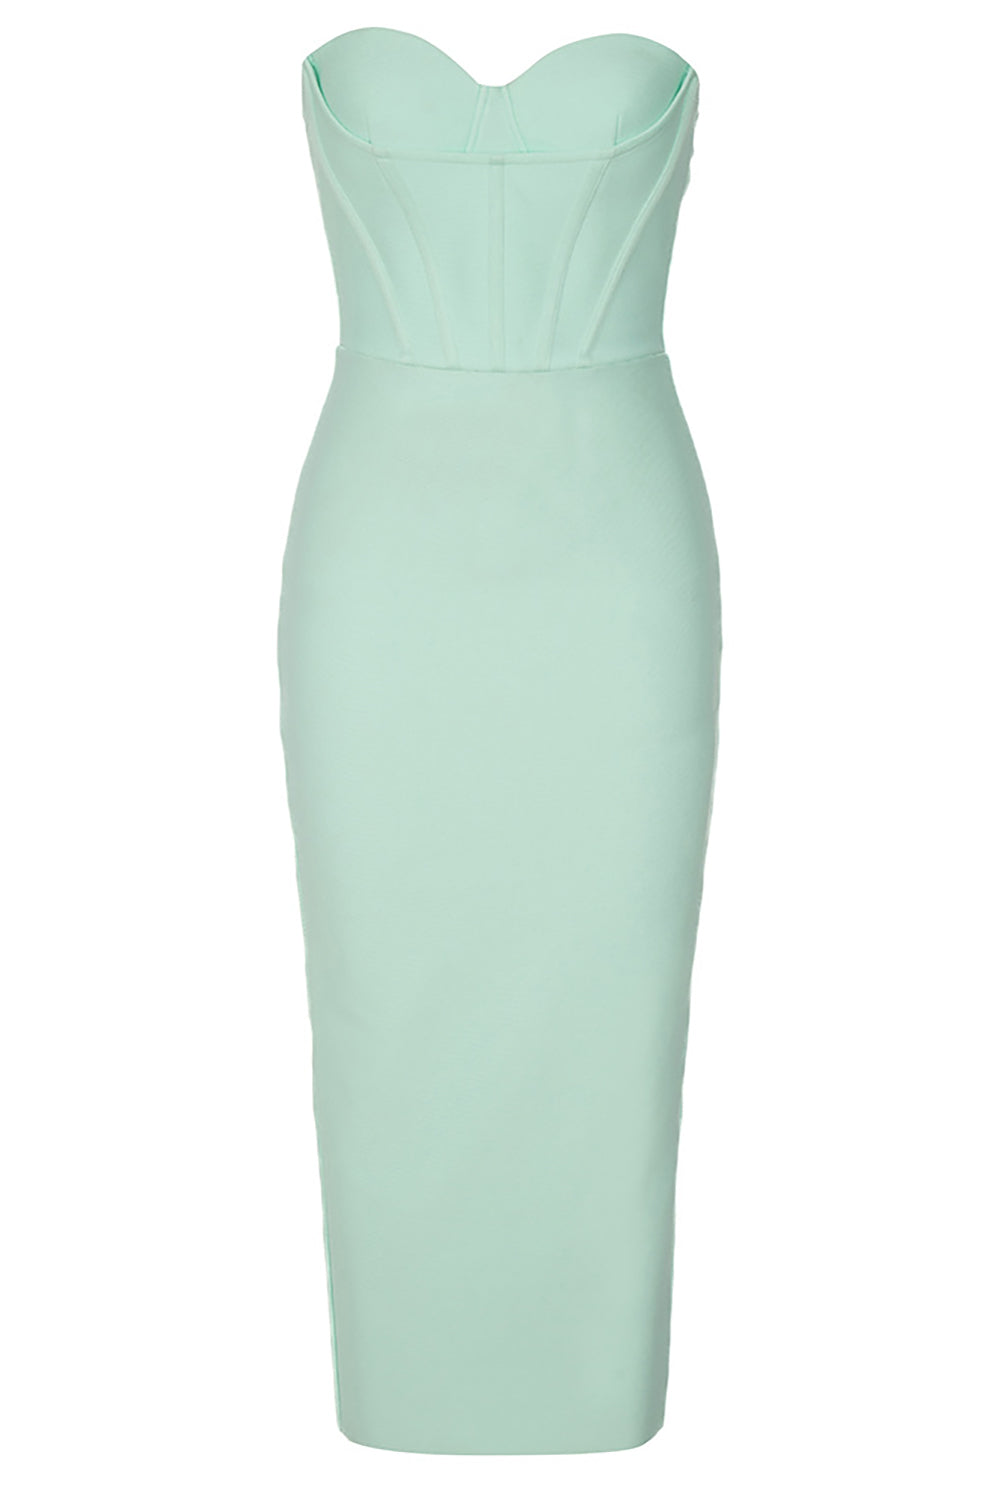 Mint Sweetheart Corset Cocktail Dress With Back Slit